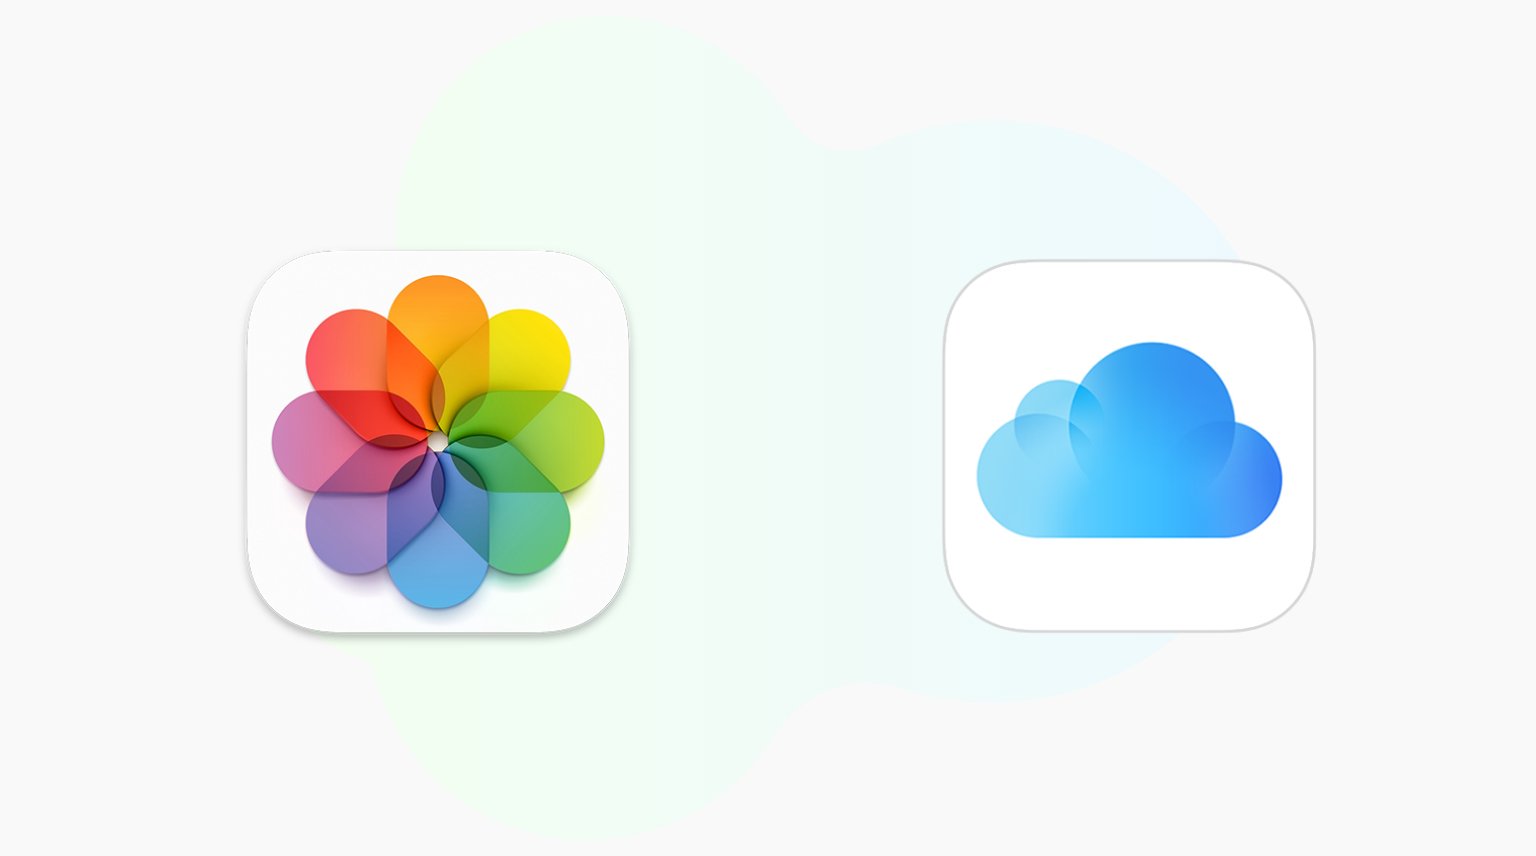 How To Download iCloud Photos Using Tubidy